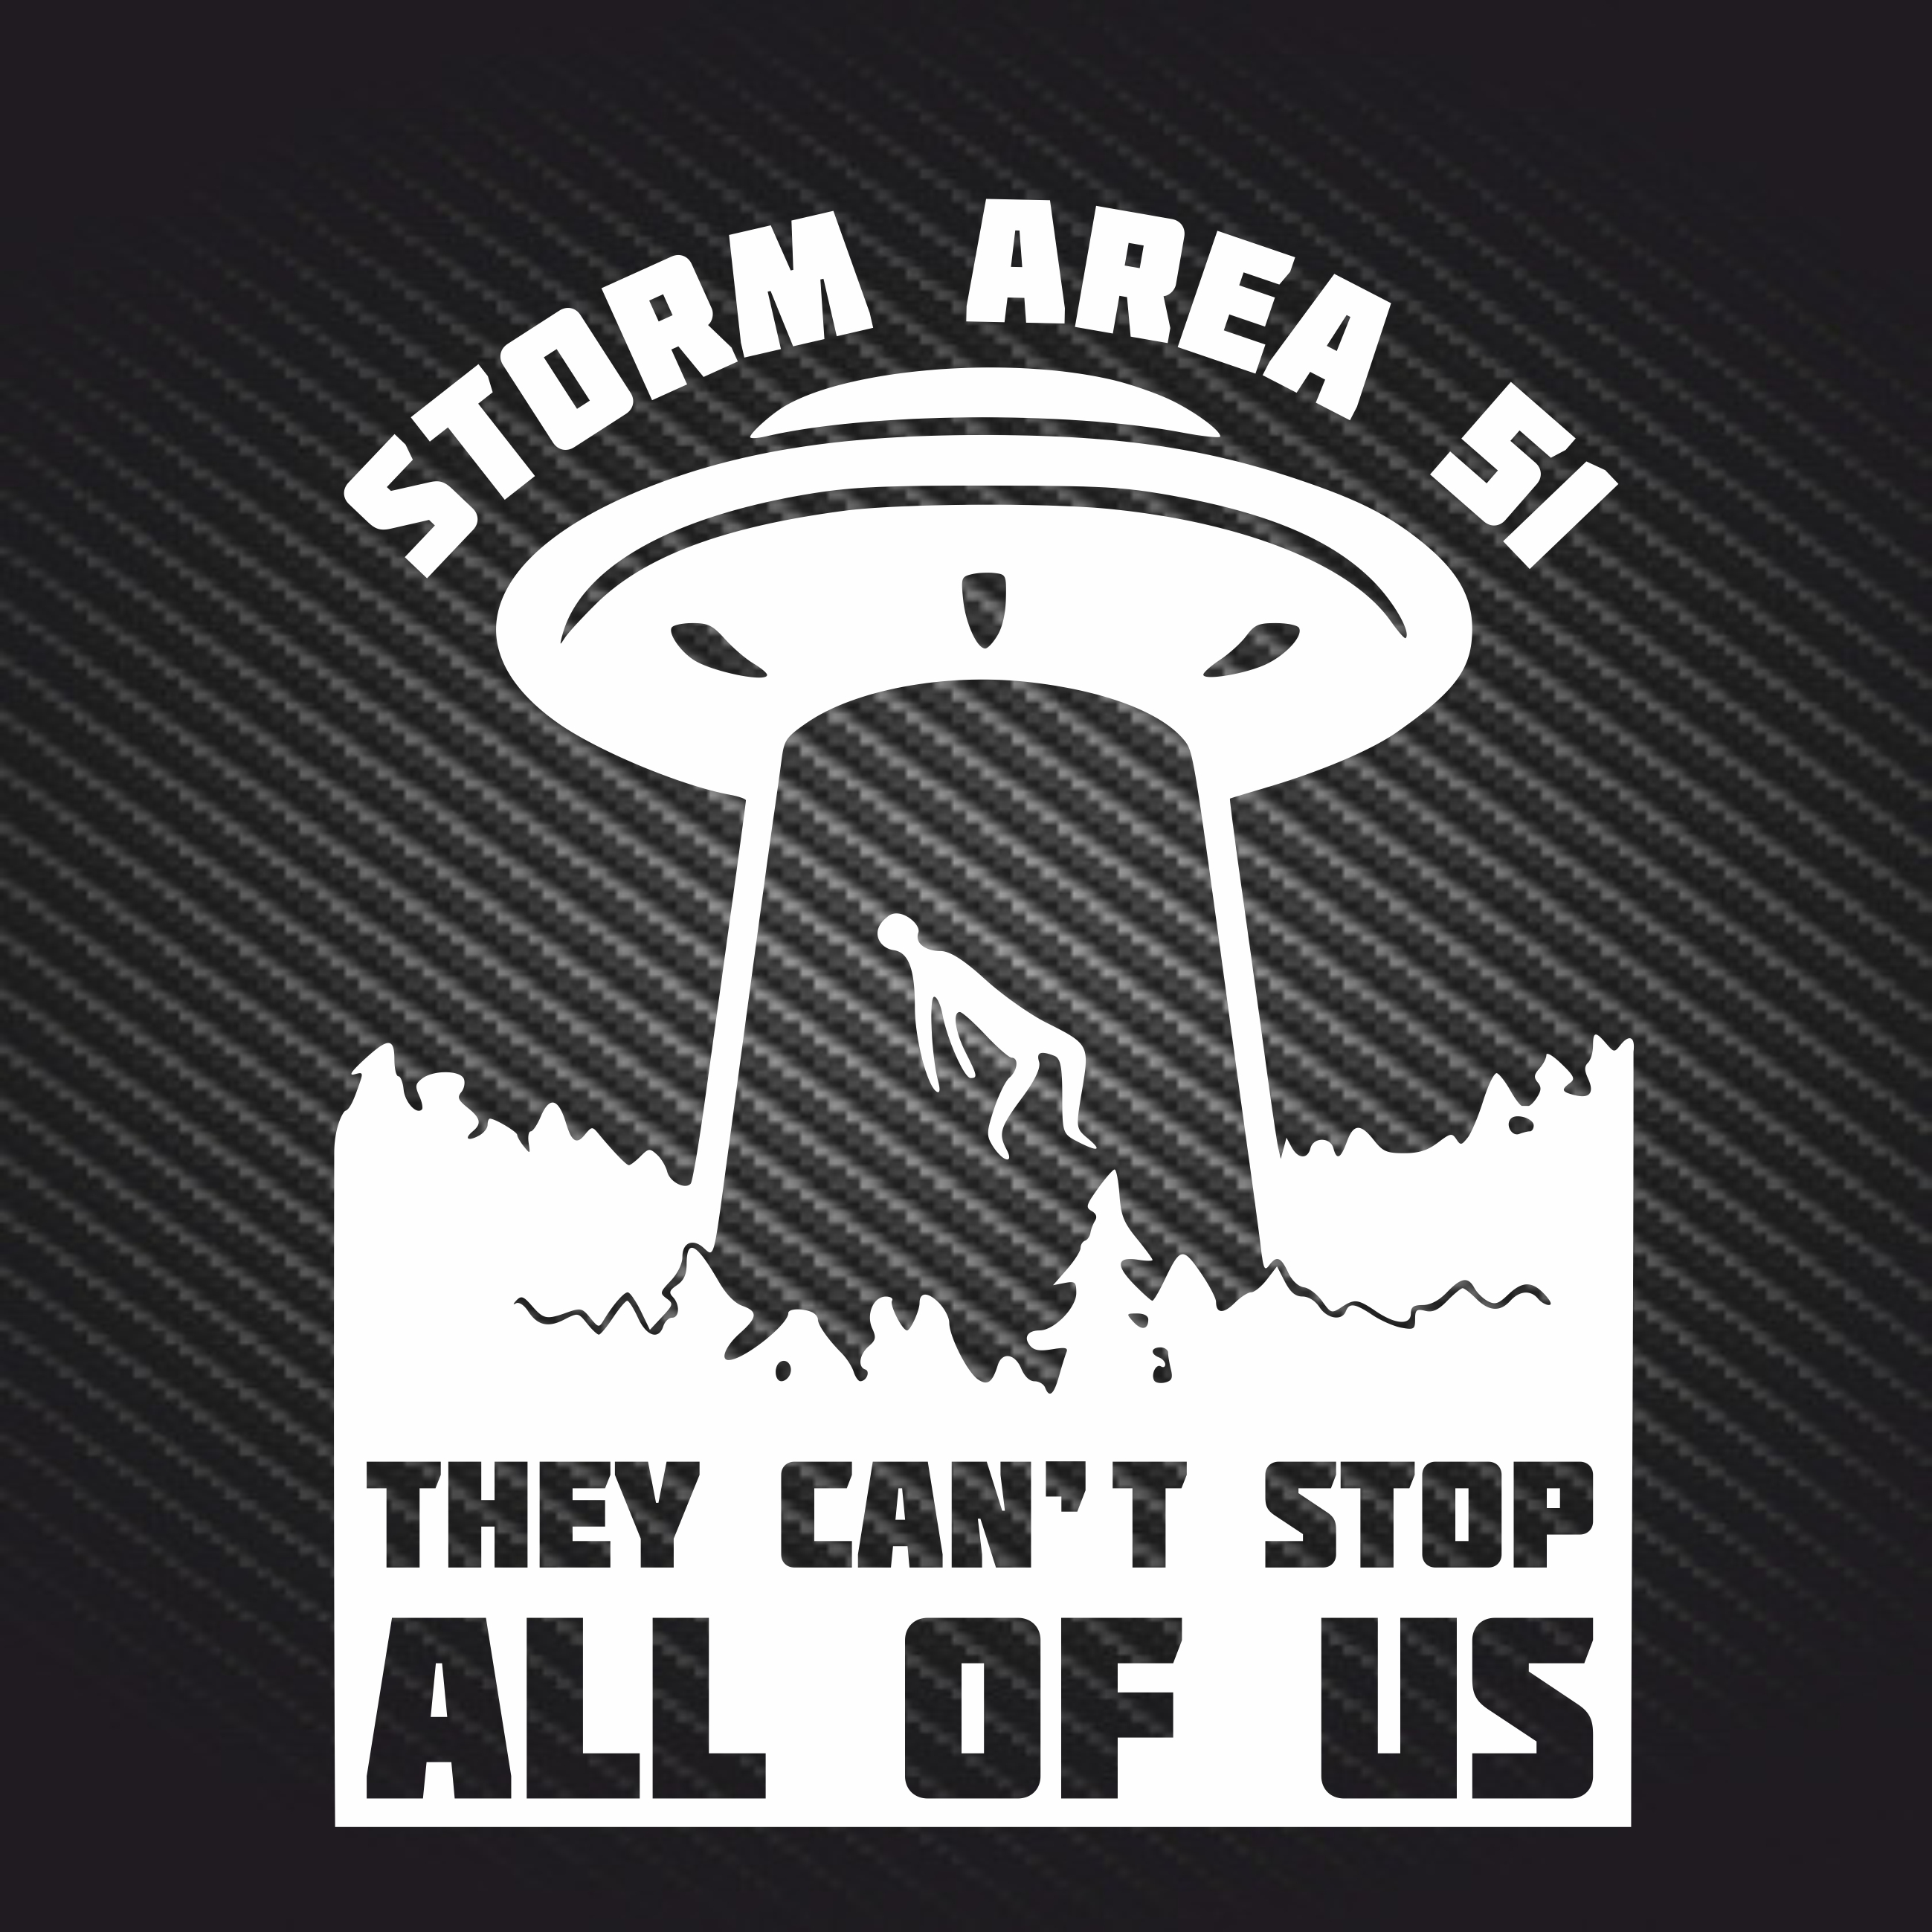 Storm Area 51 They Can't Stop All of Us Meme Stickers 